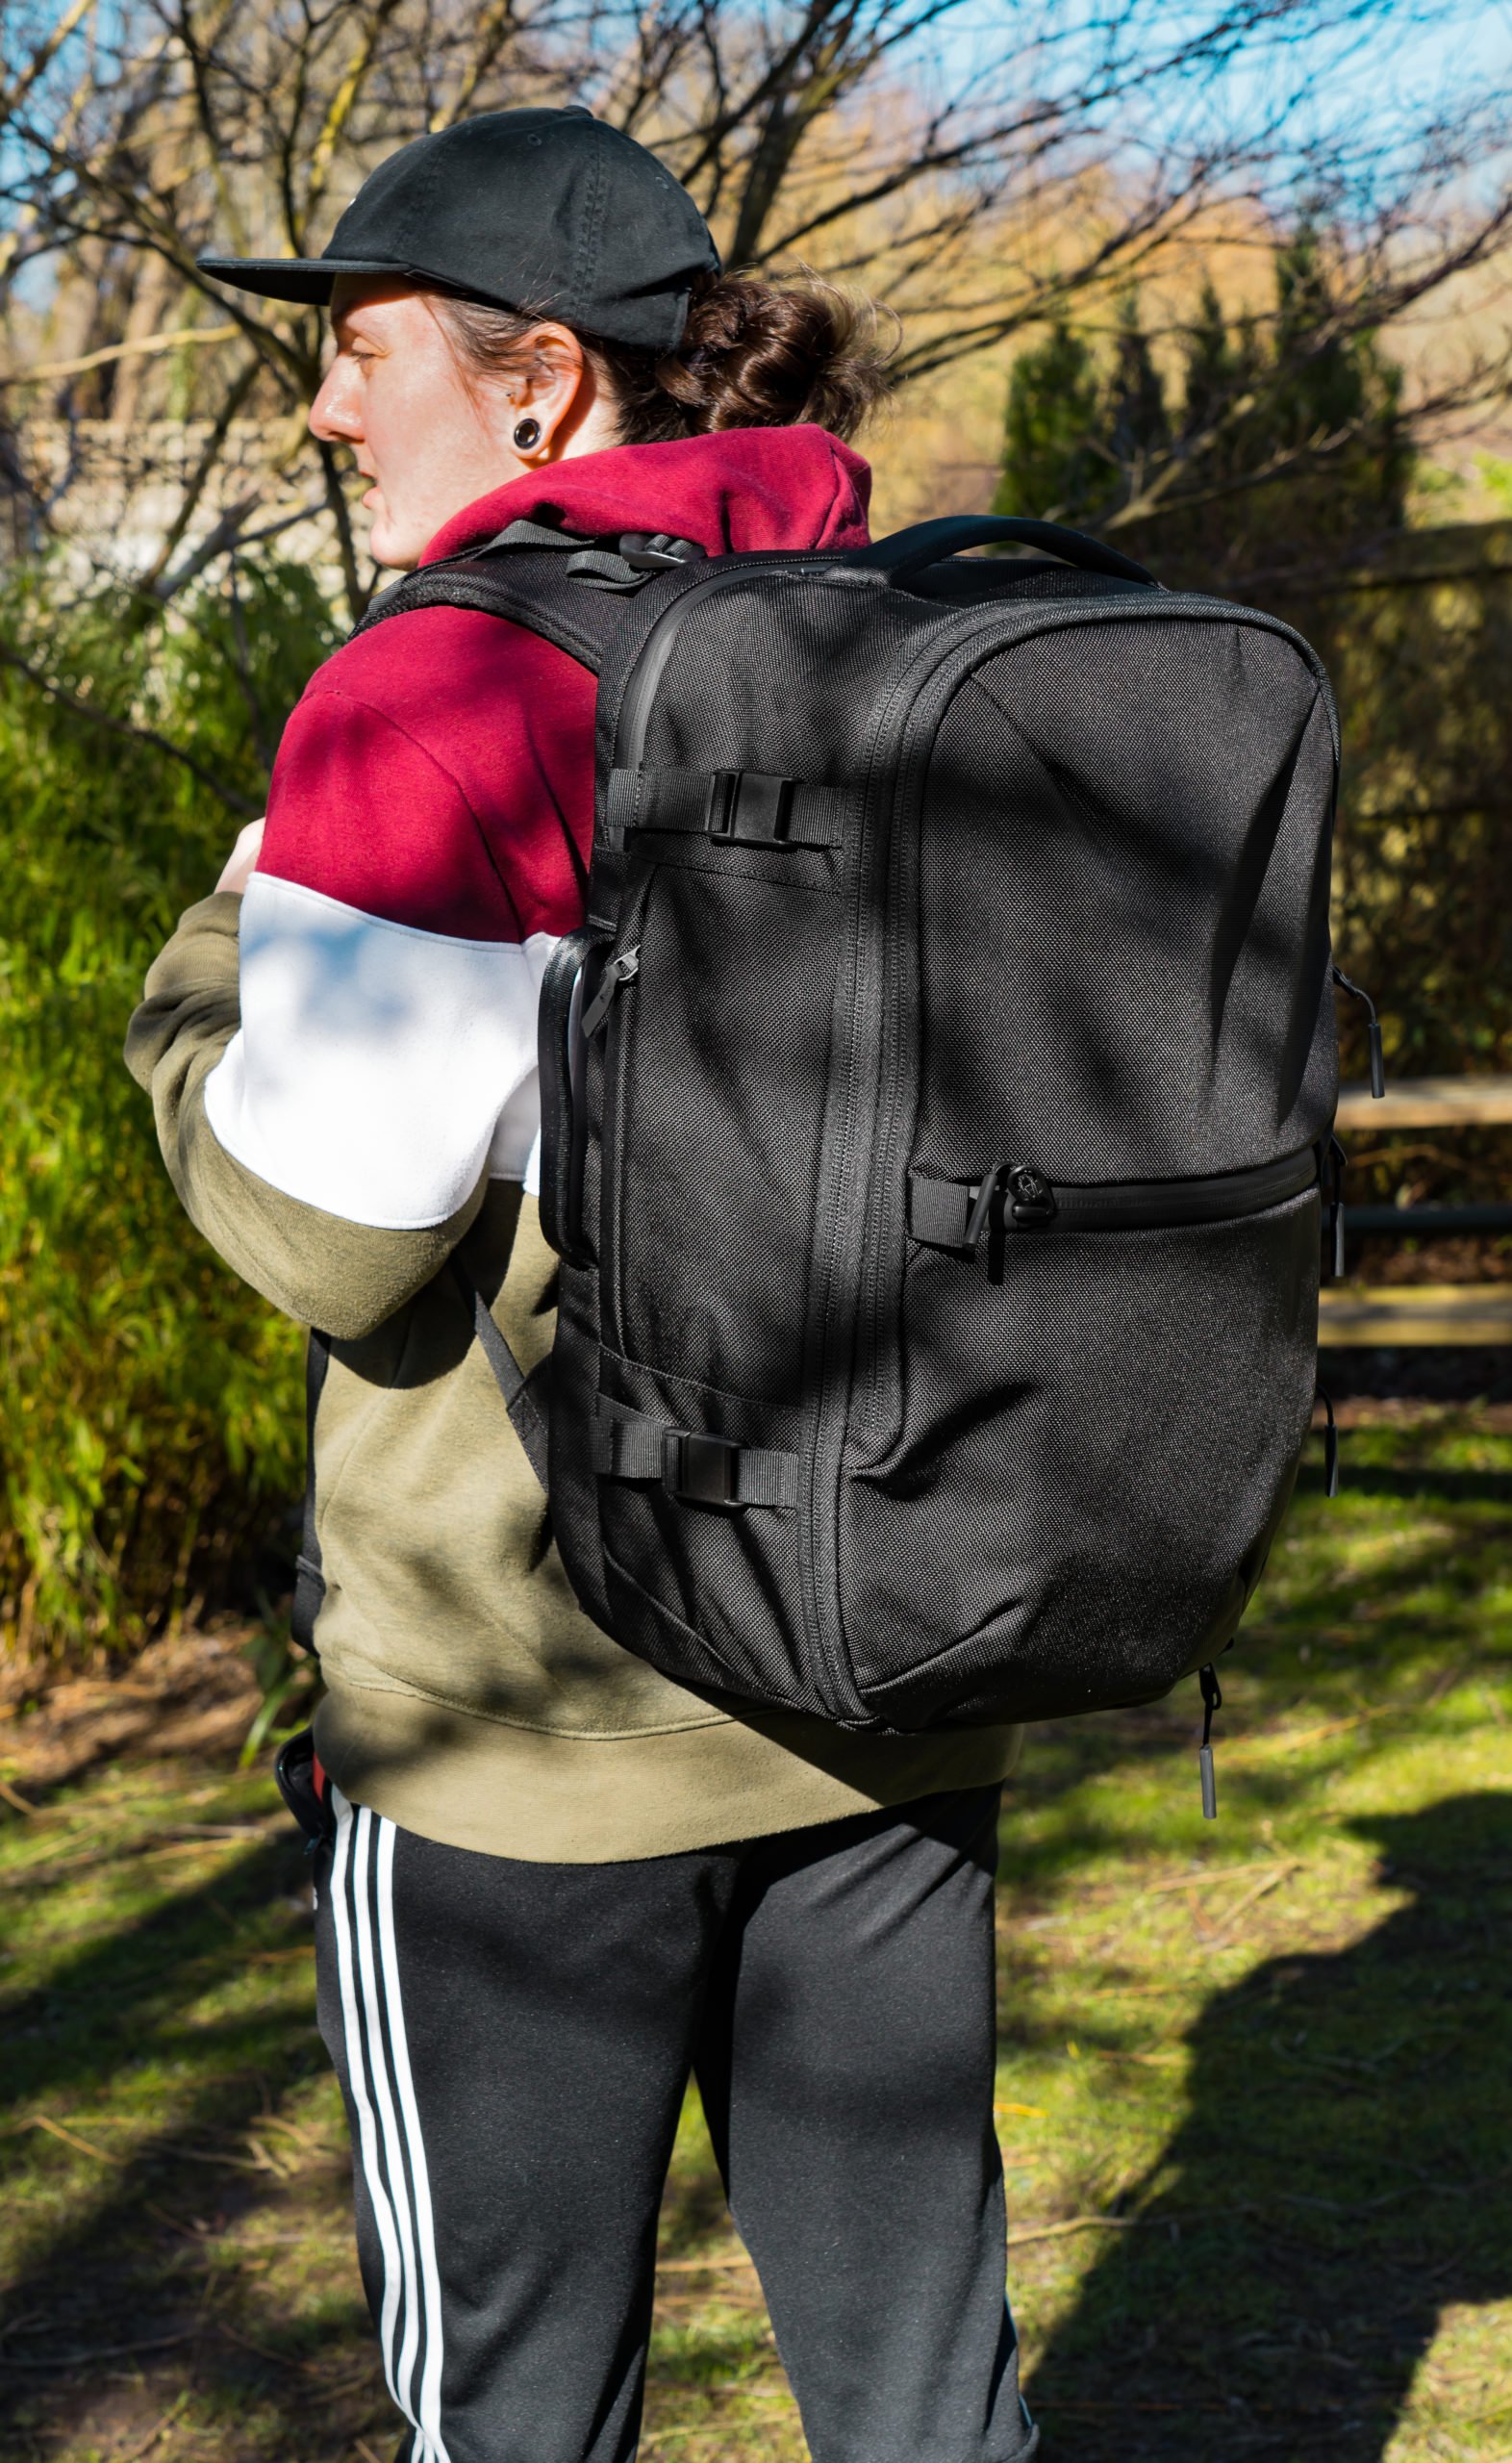 AER Travel Pack 3 Review: The Perfect One Bag Travel Backpack